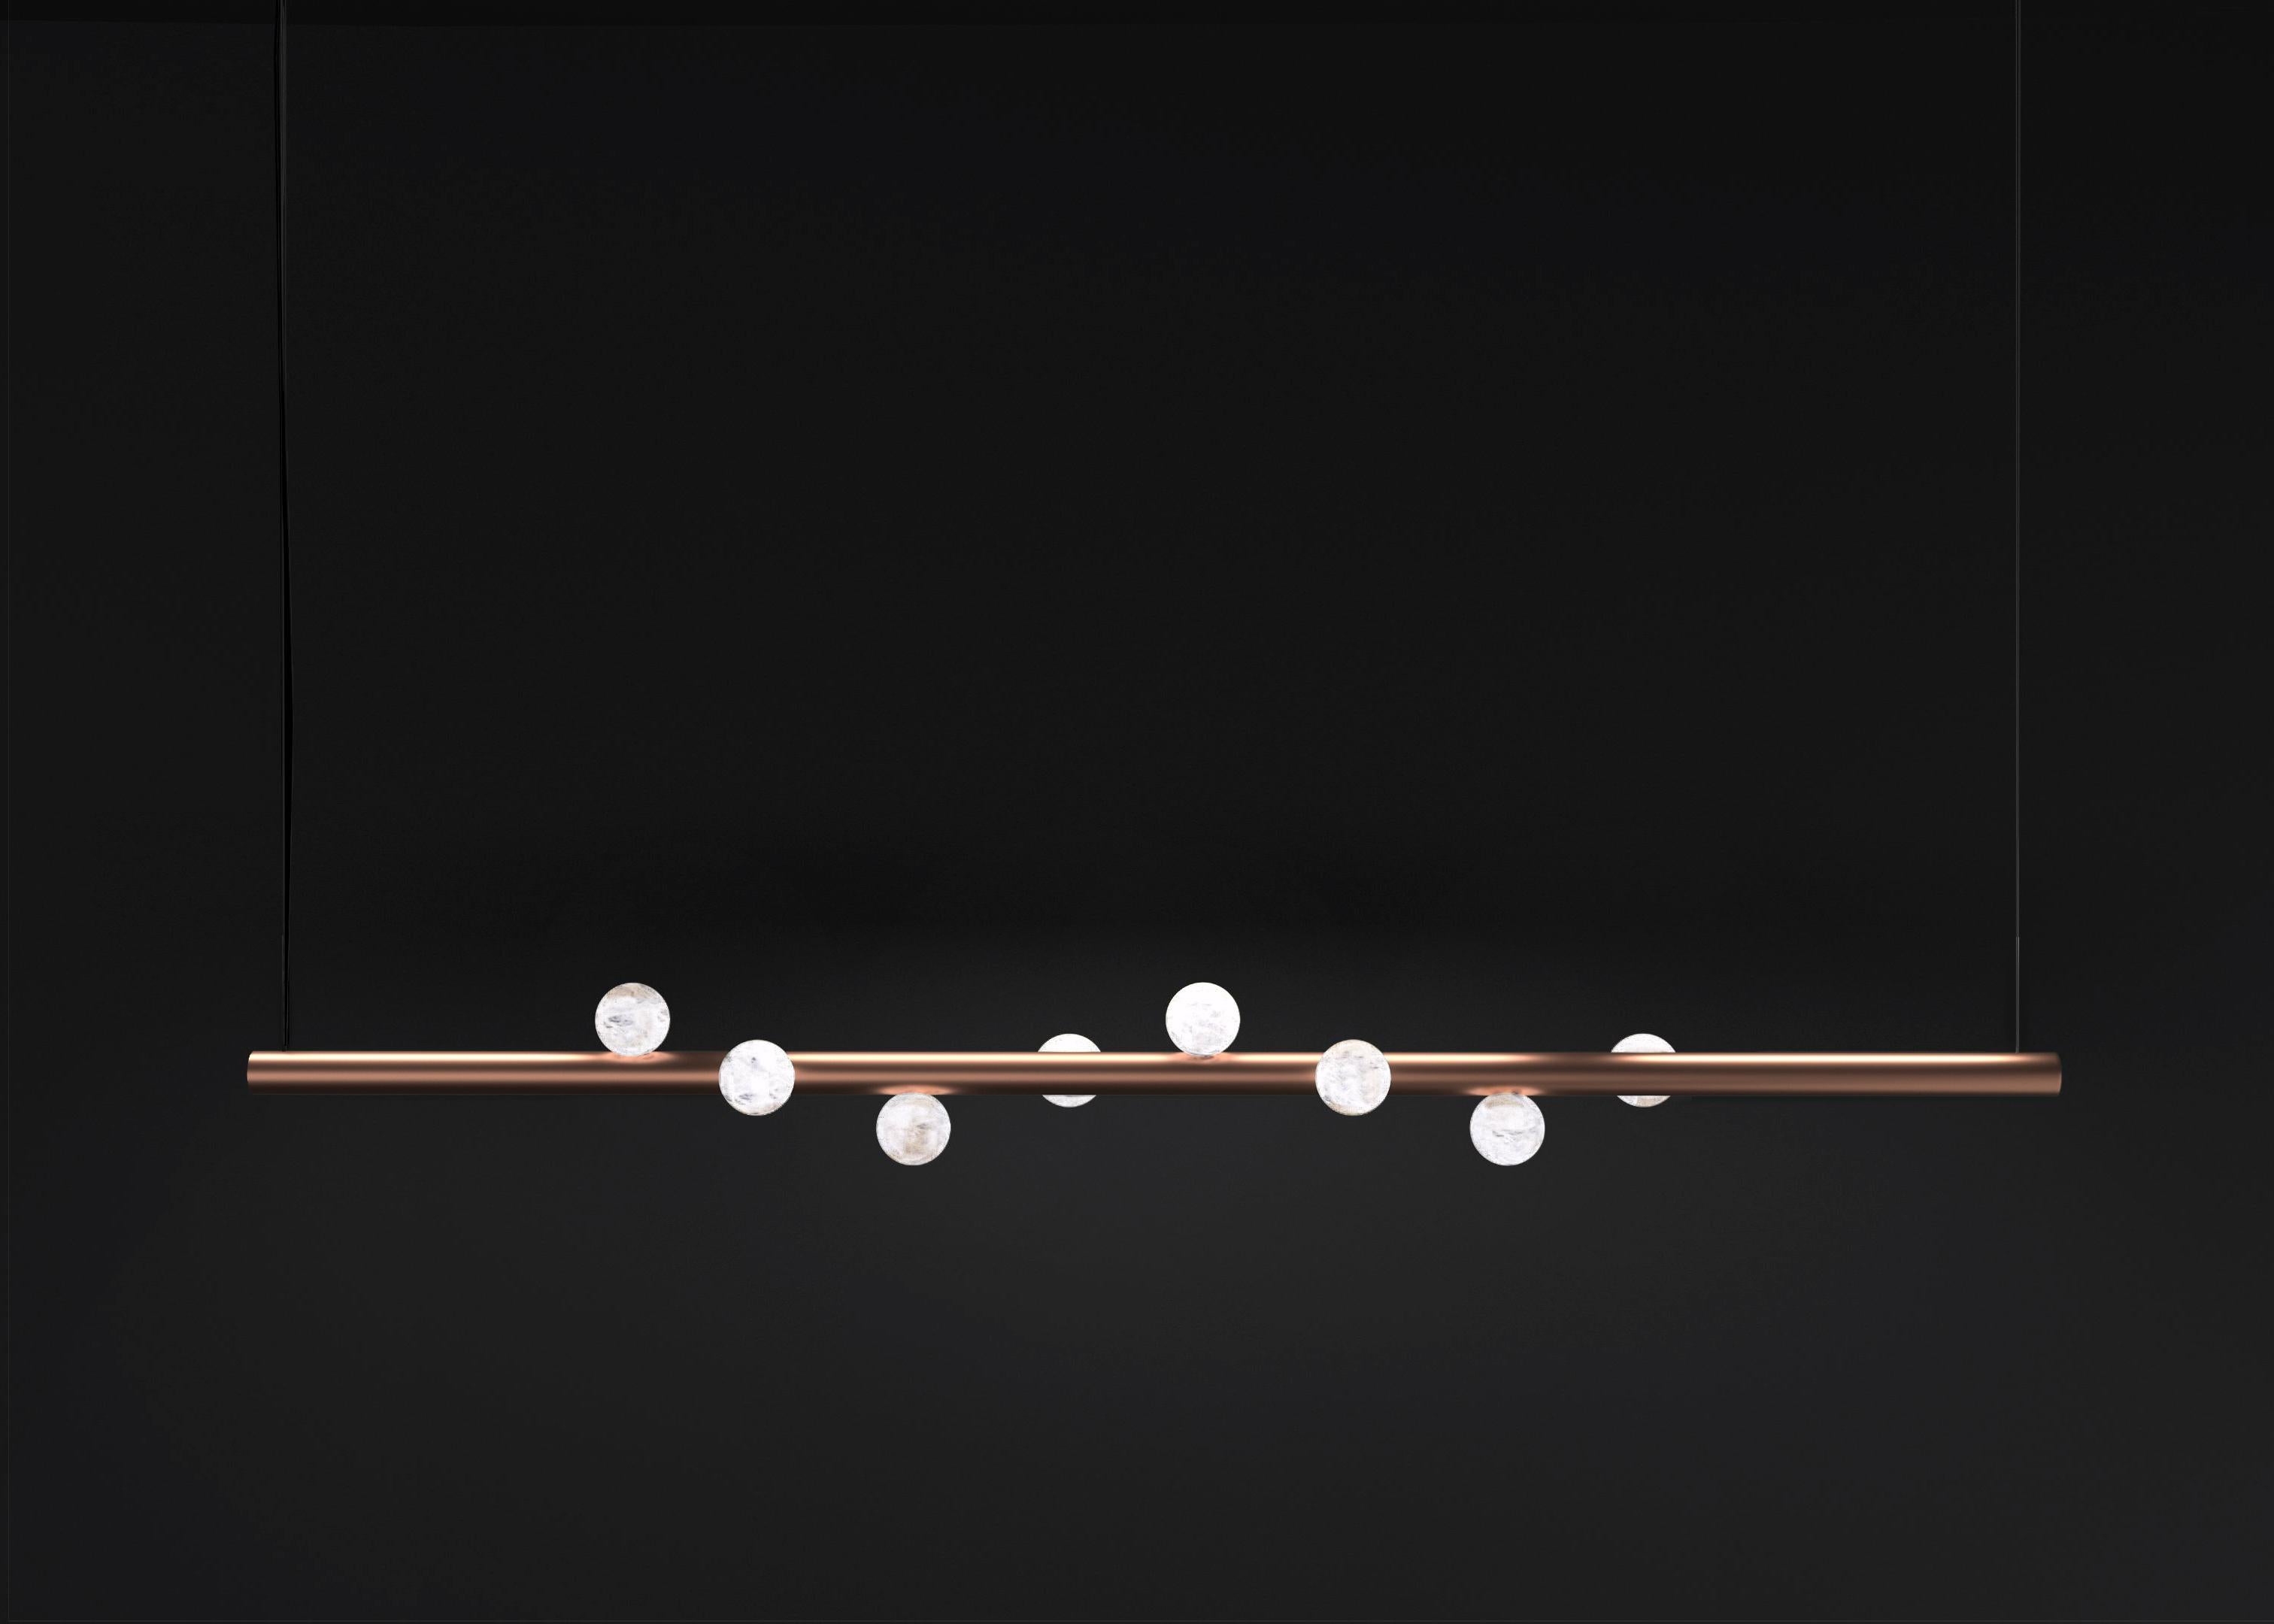 Demetra Copper Pendant Lamp 1 by Alabastro Italiano
Dimensions: D 12 x W 120 x H 12 cm.
Materials: White alabaster, copper and leather.

Available in different finishes: Shiny Silver, Bronze, Brushed Brass, Ruggine of Florence, Brushed Burnished,